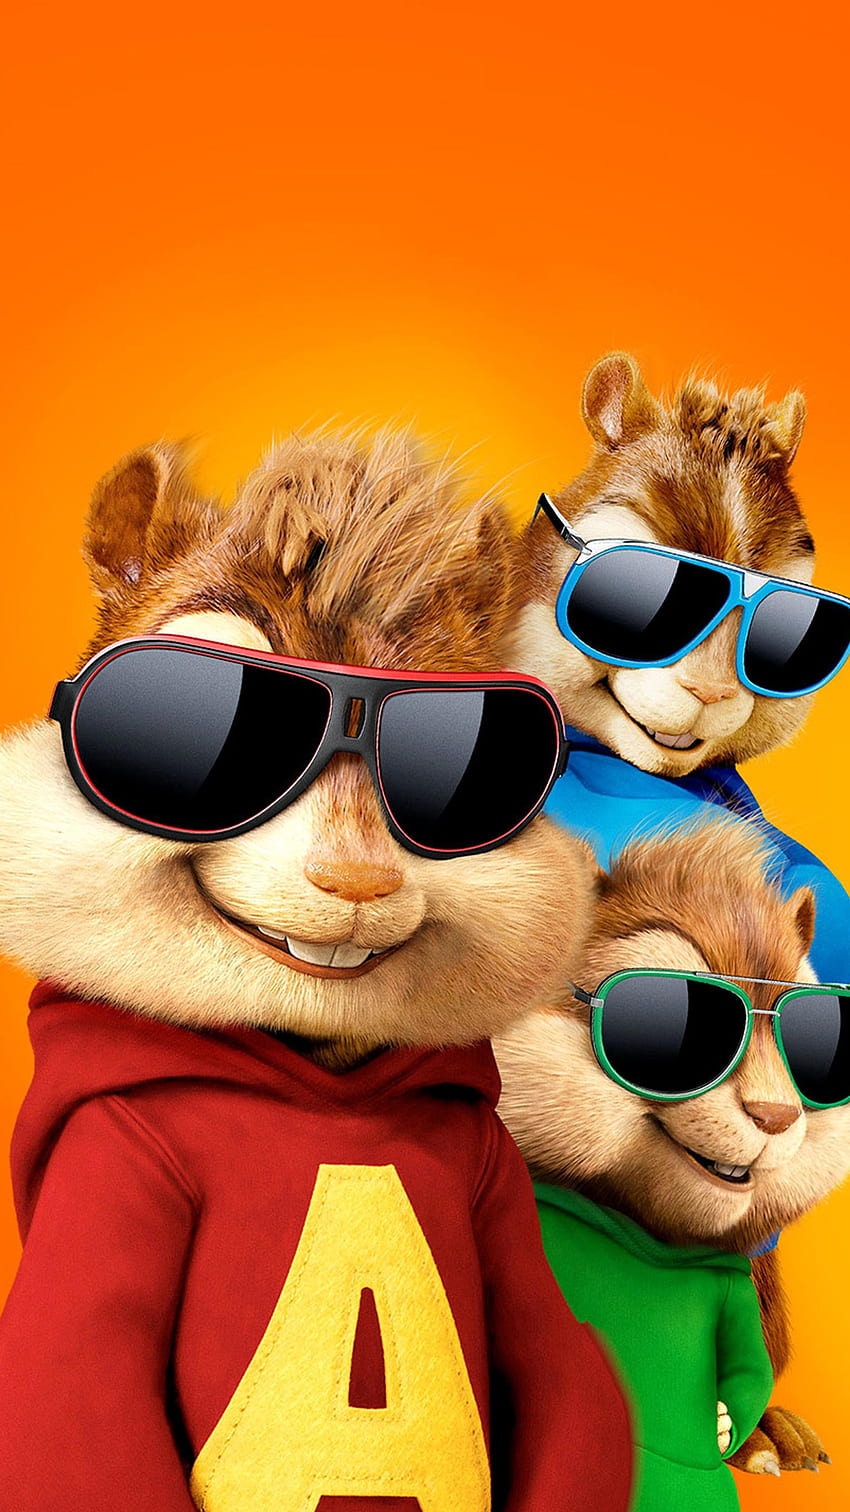 Alvin and the Chipmunks: The Road Chip (2022) 映画 HD電話の壁紙